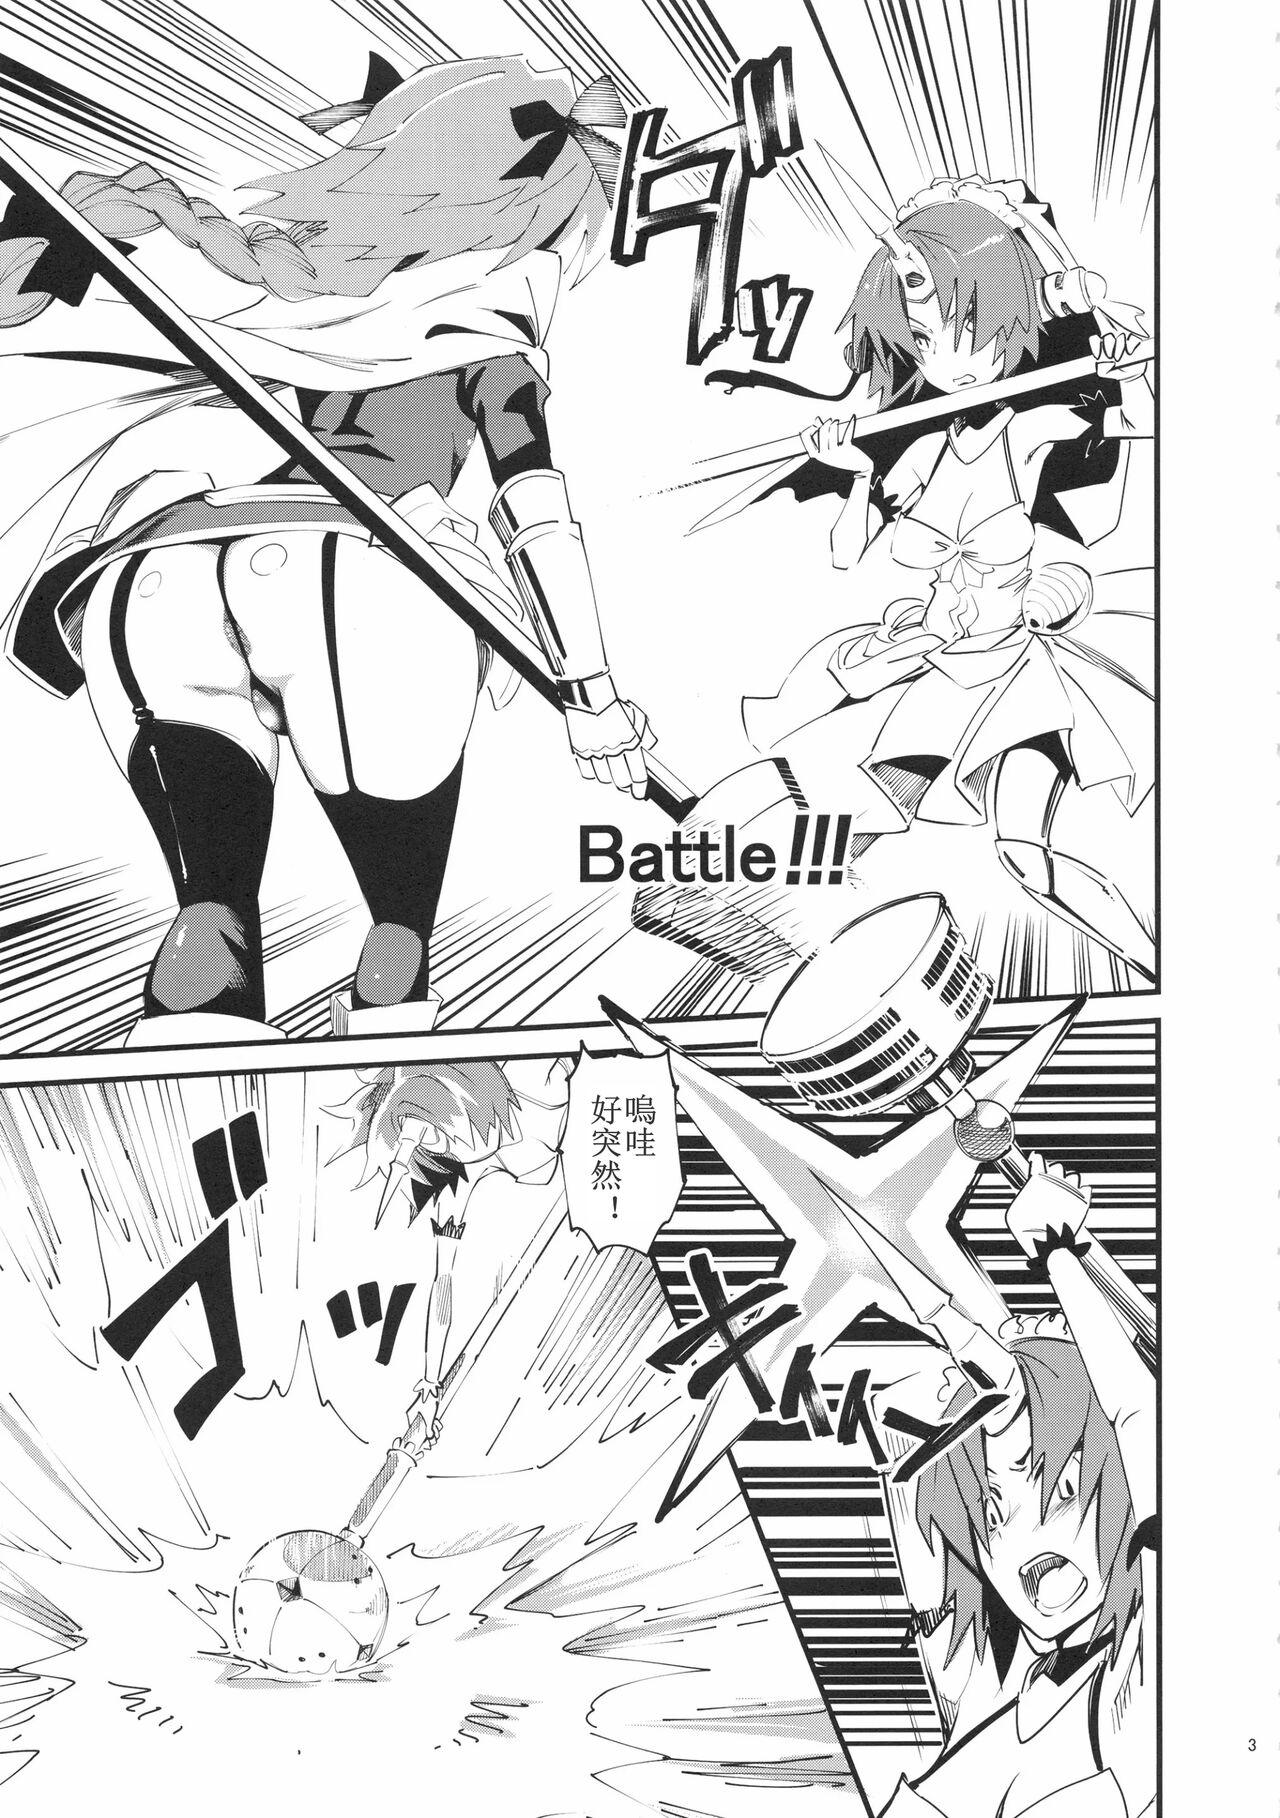 Flaca CLASS CHANGE!! Brave Astolfo - Fate apocrypha Chica - Page 5